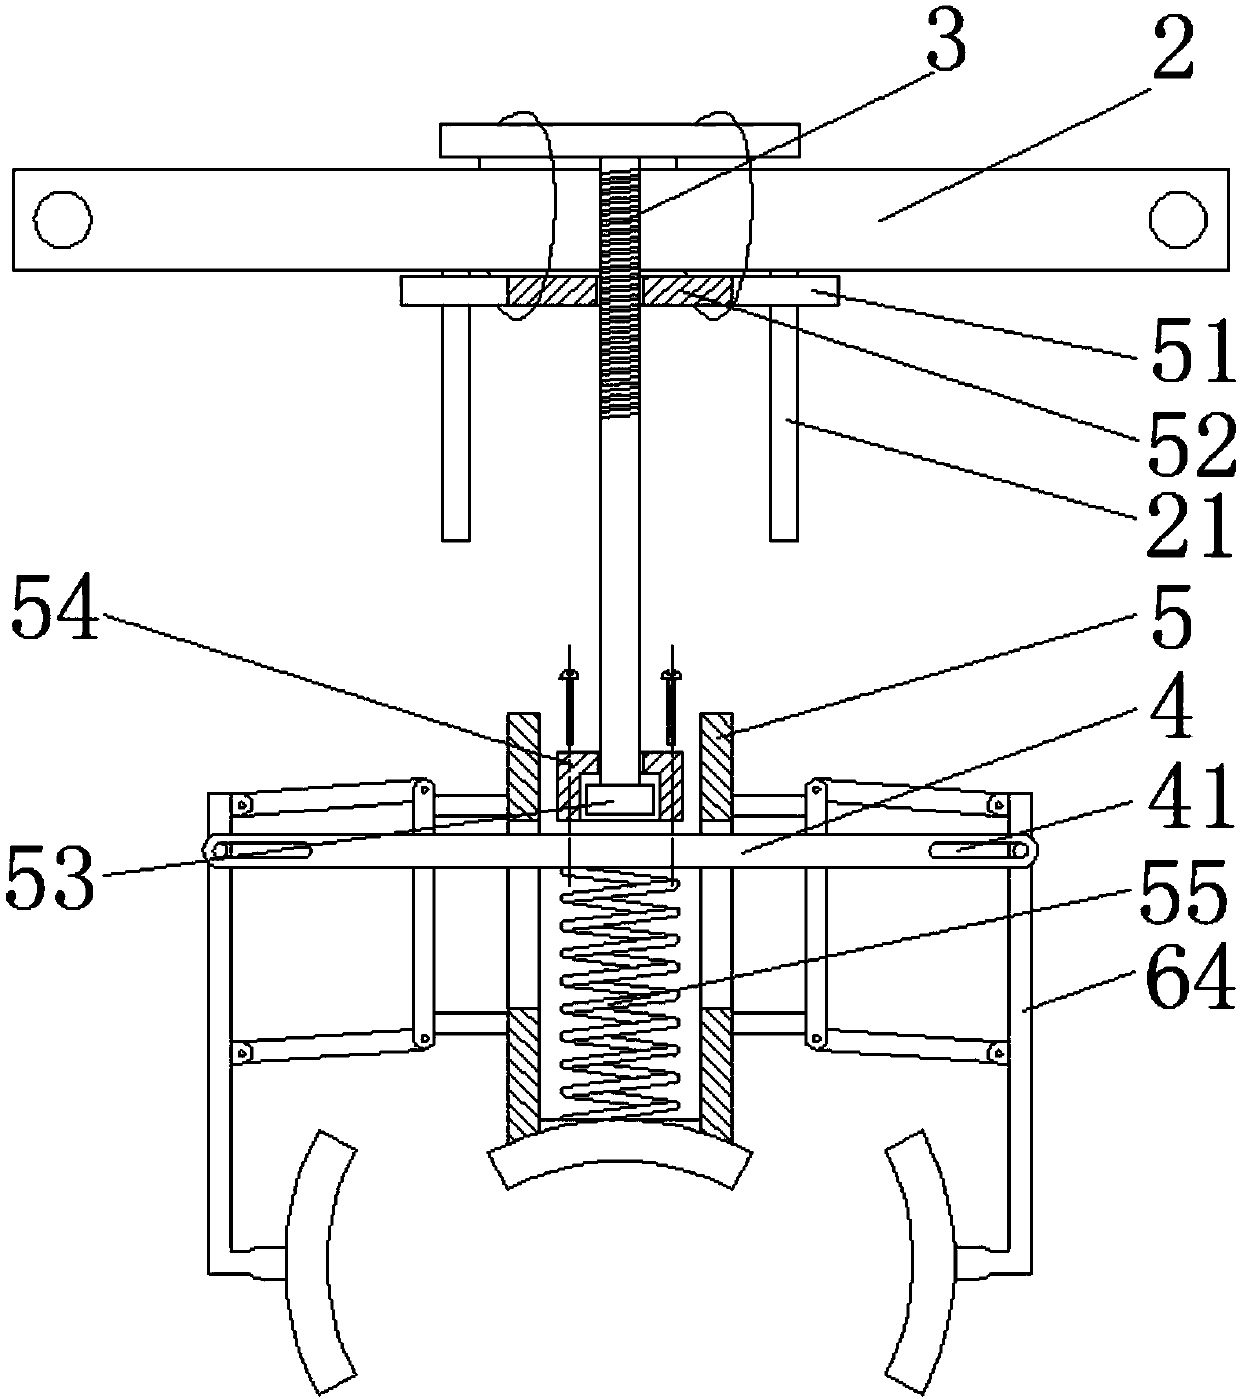 Device for clamping insulator